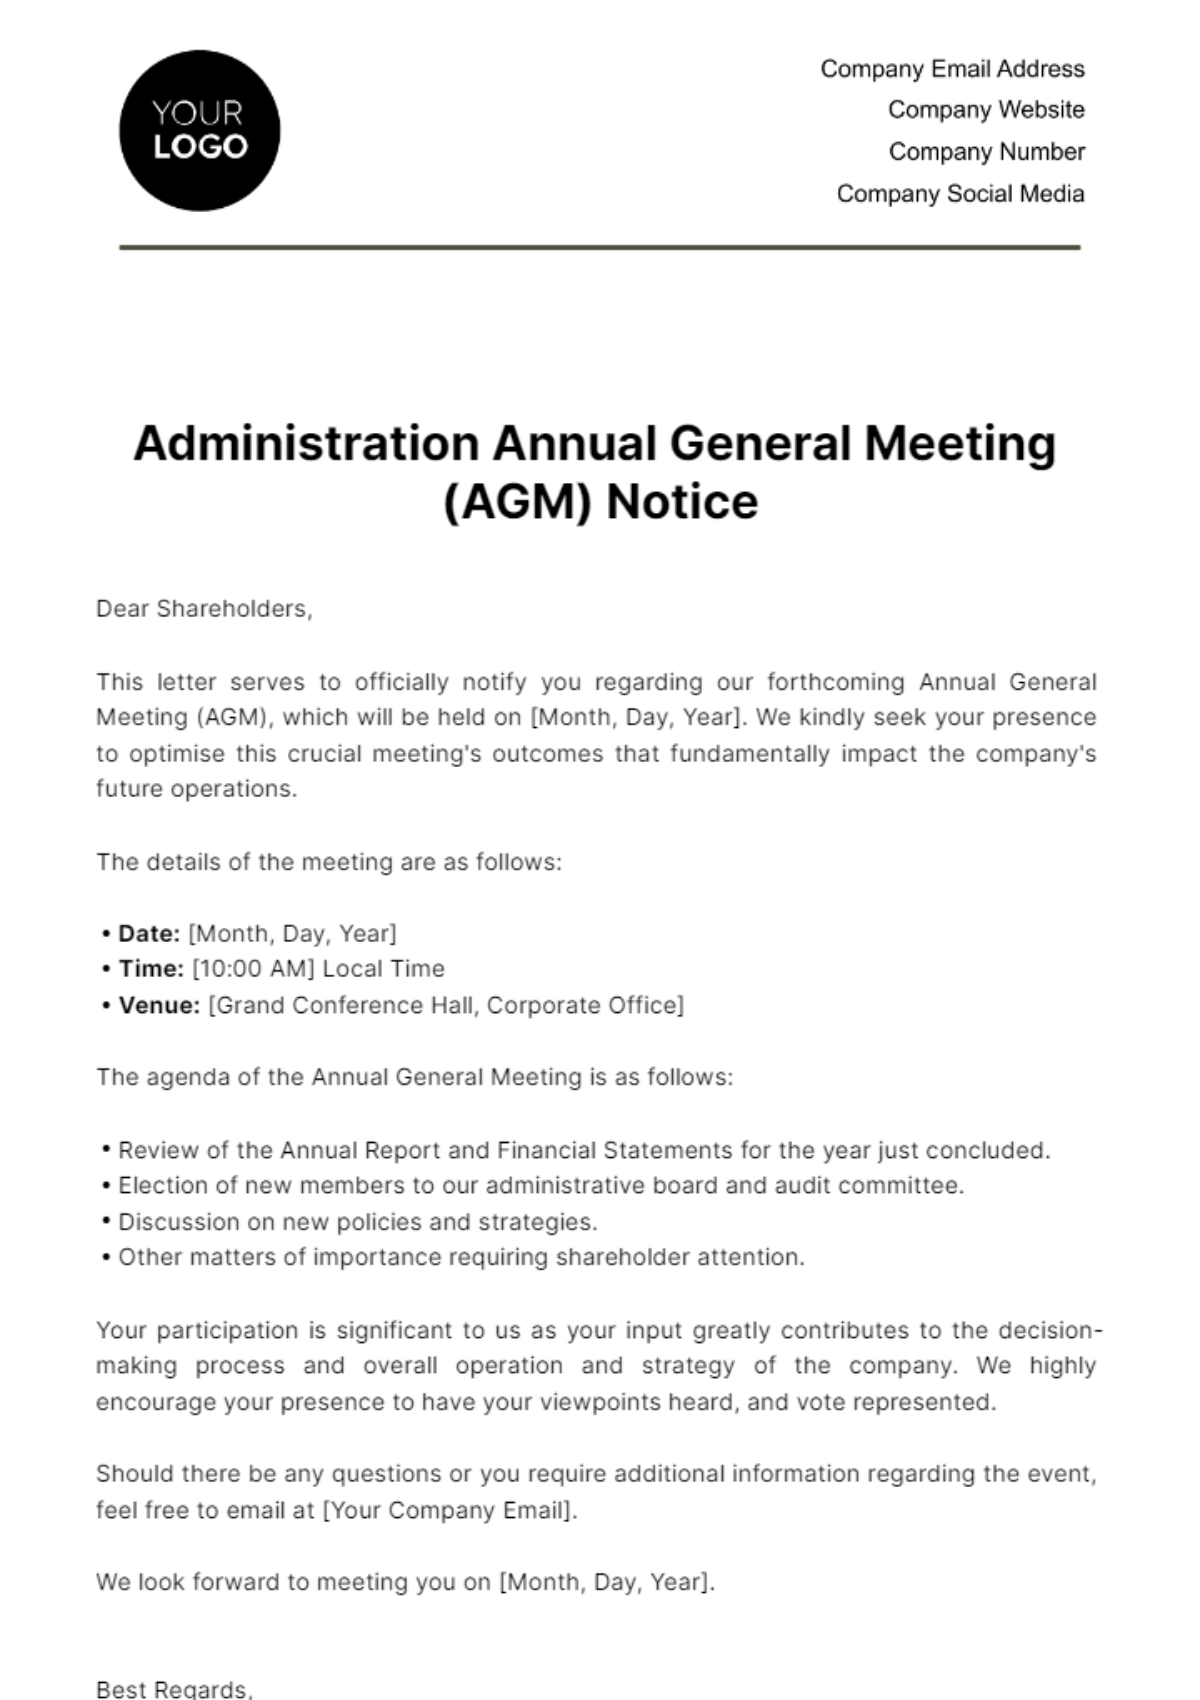 Free Administration Annual General Meeting (AGM) Notice Template